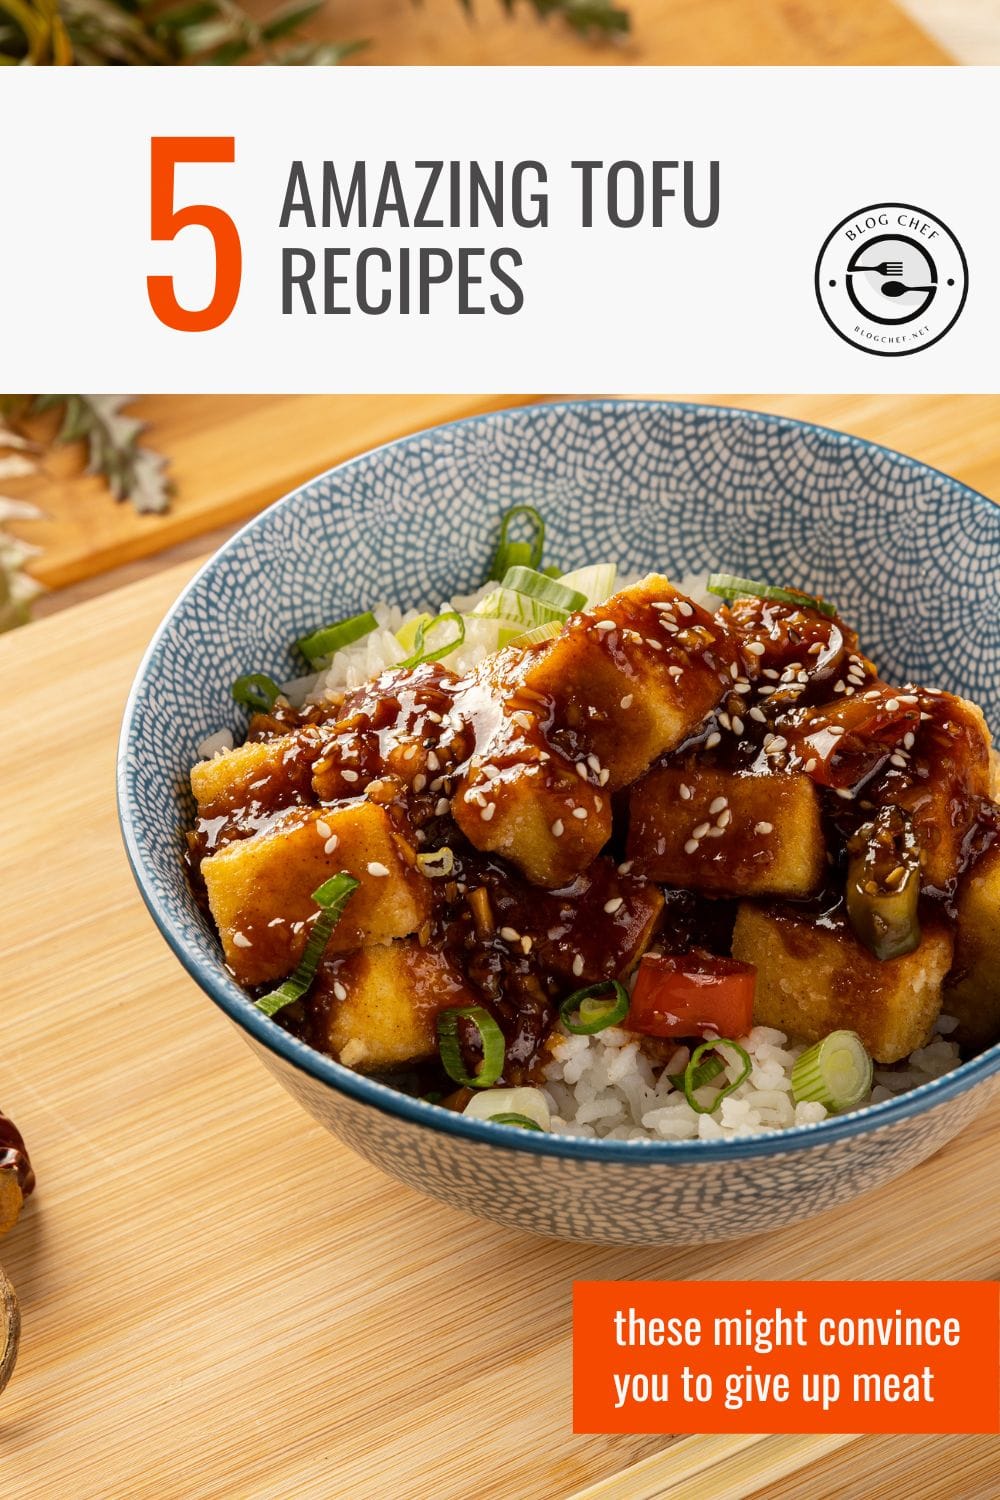 Close up view of tofu dish with text overlay that reads 5 amazing tofu recipes.